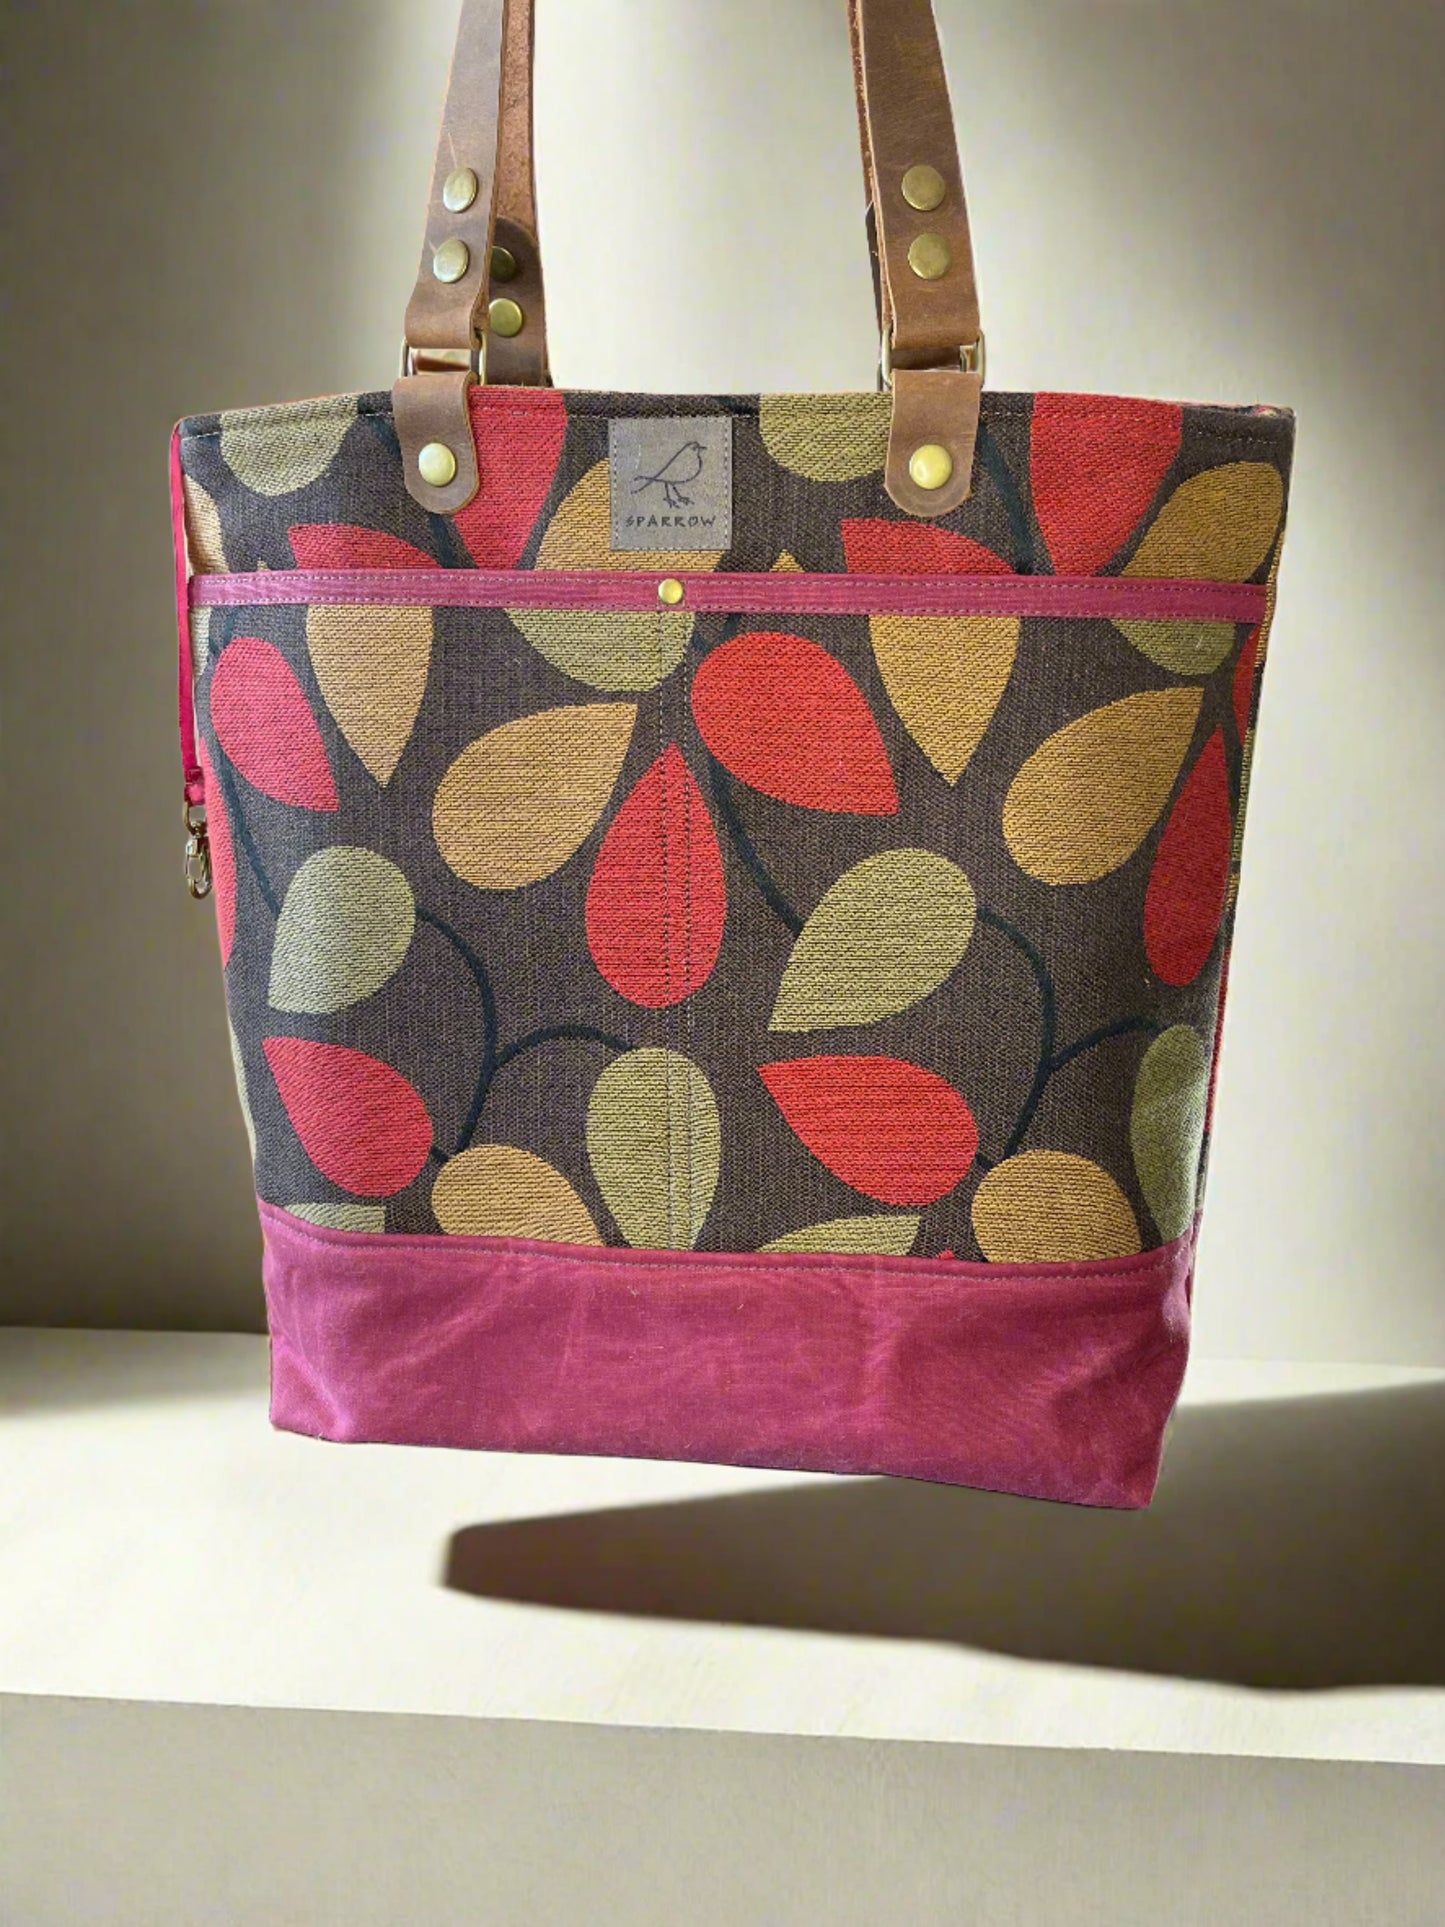 Zipped-Up Tote